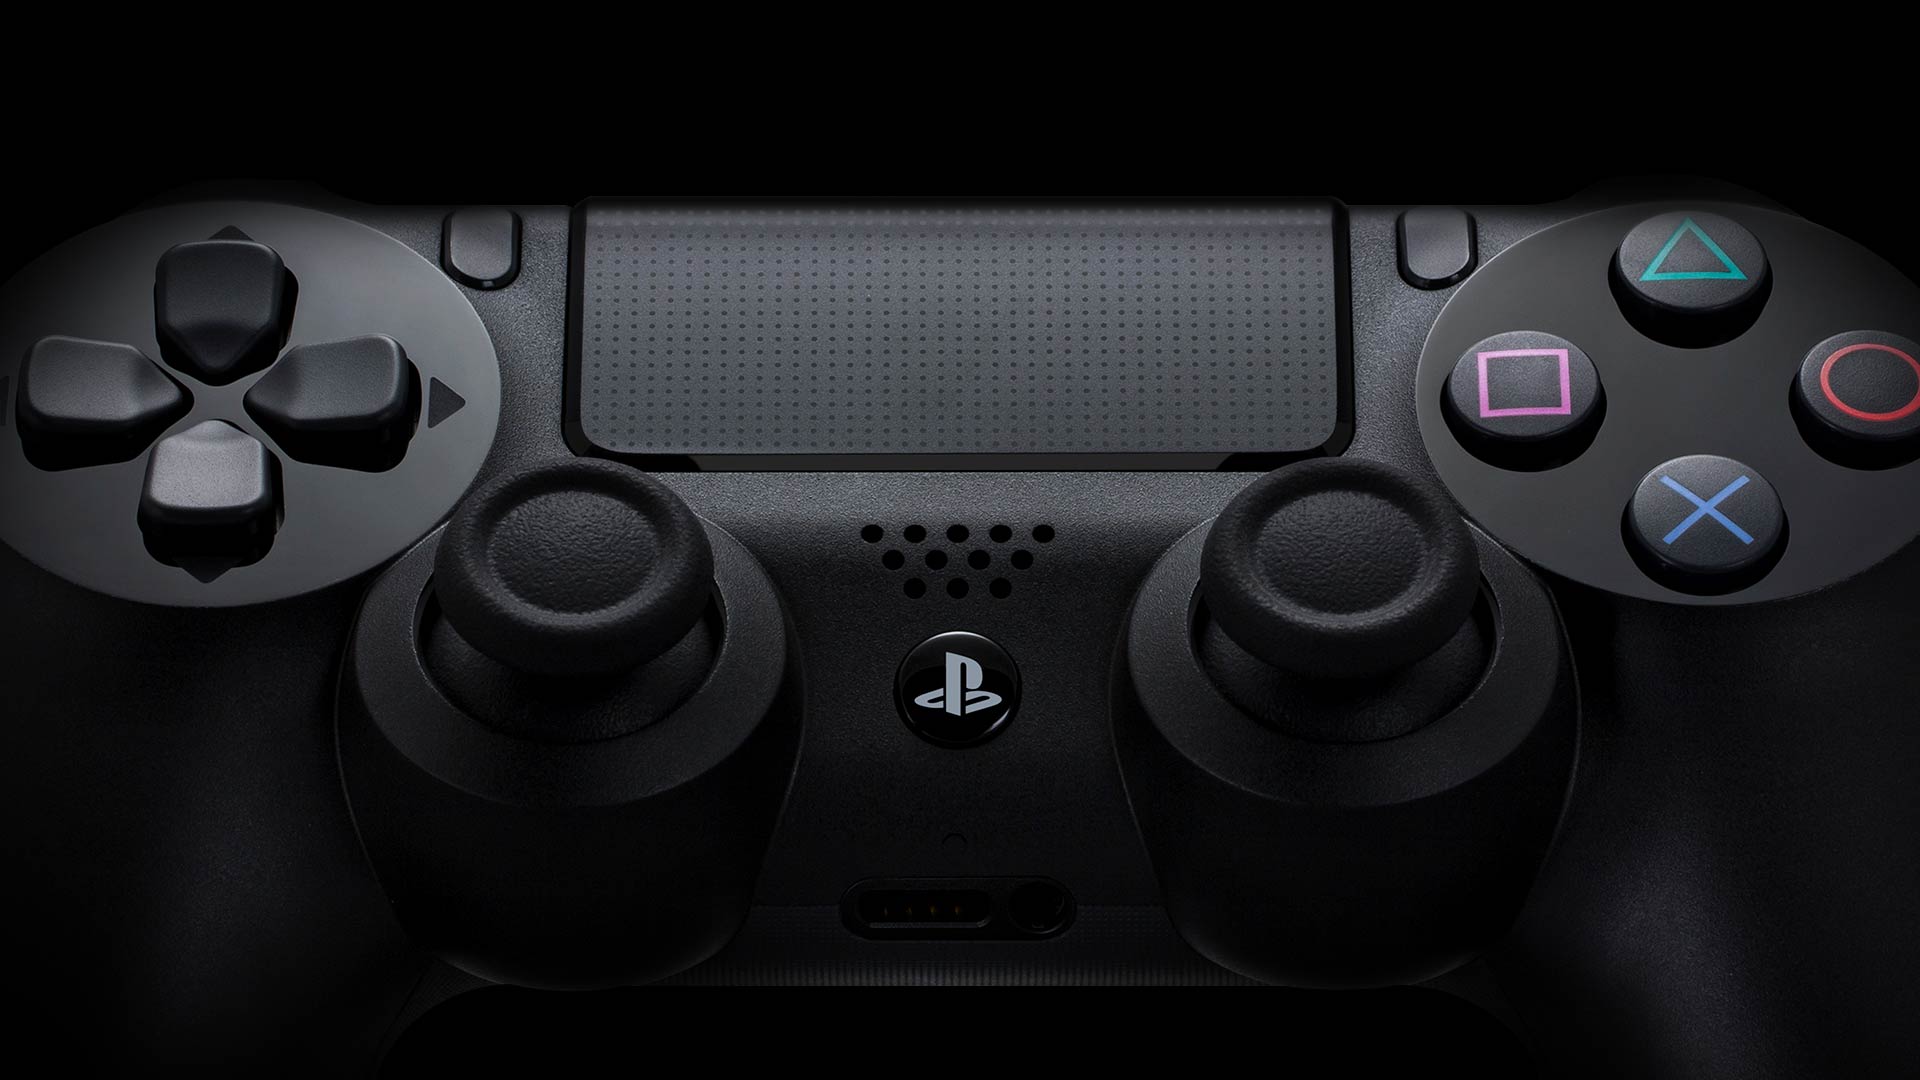 PS4 Controller Up Close Wallpapers 50374 1920x1080 px